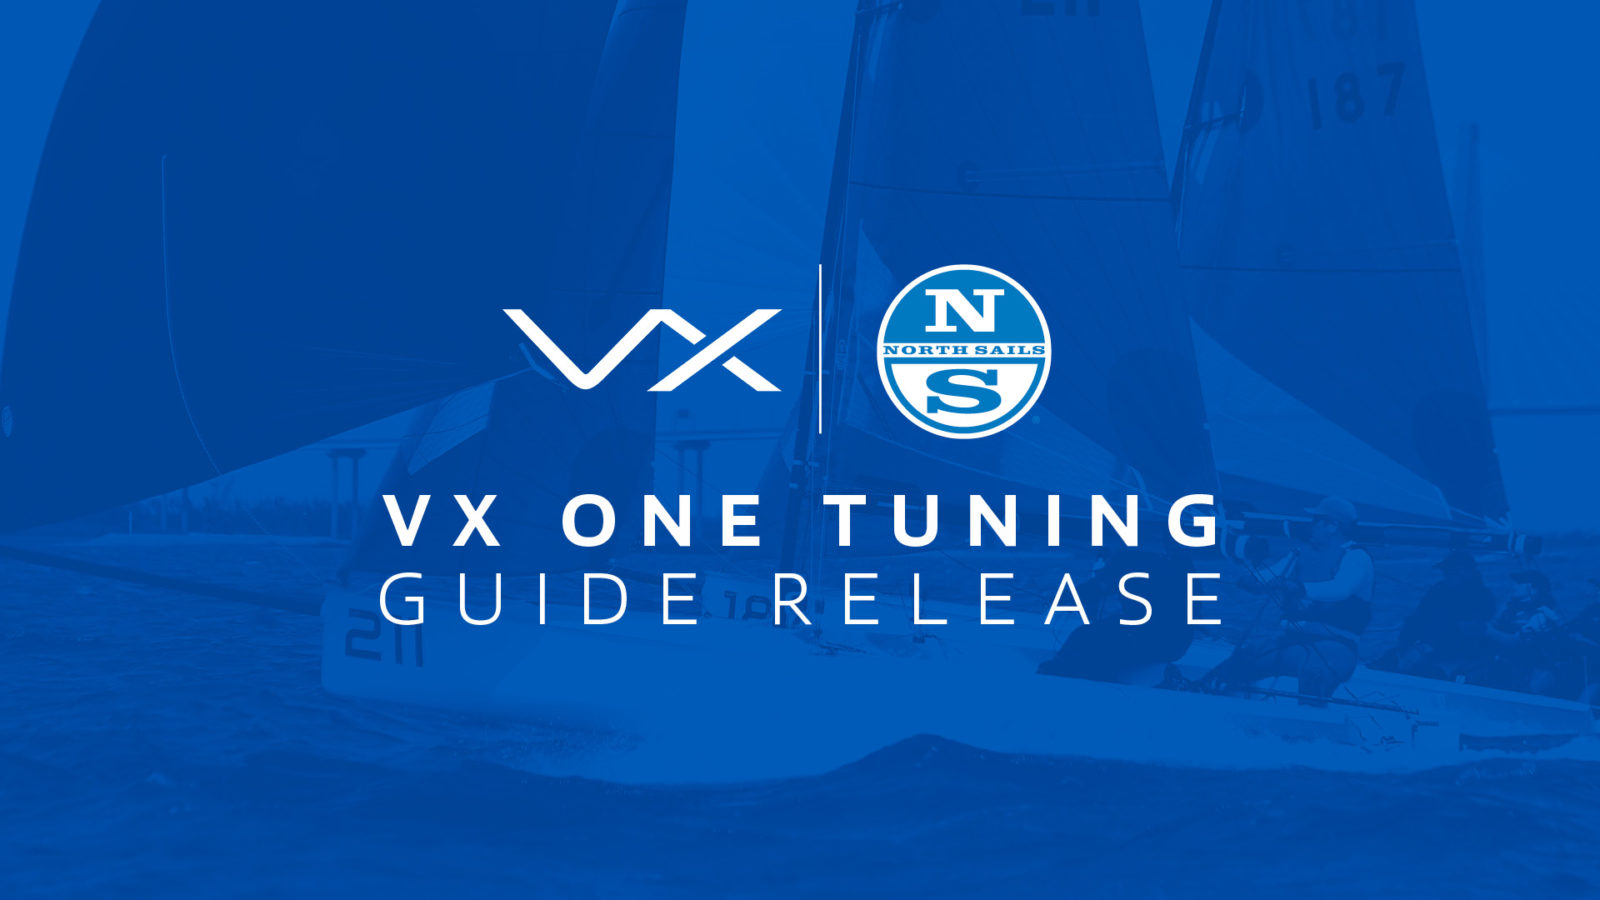 VX ONE TUNING GUIDE RELEASE